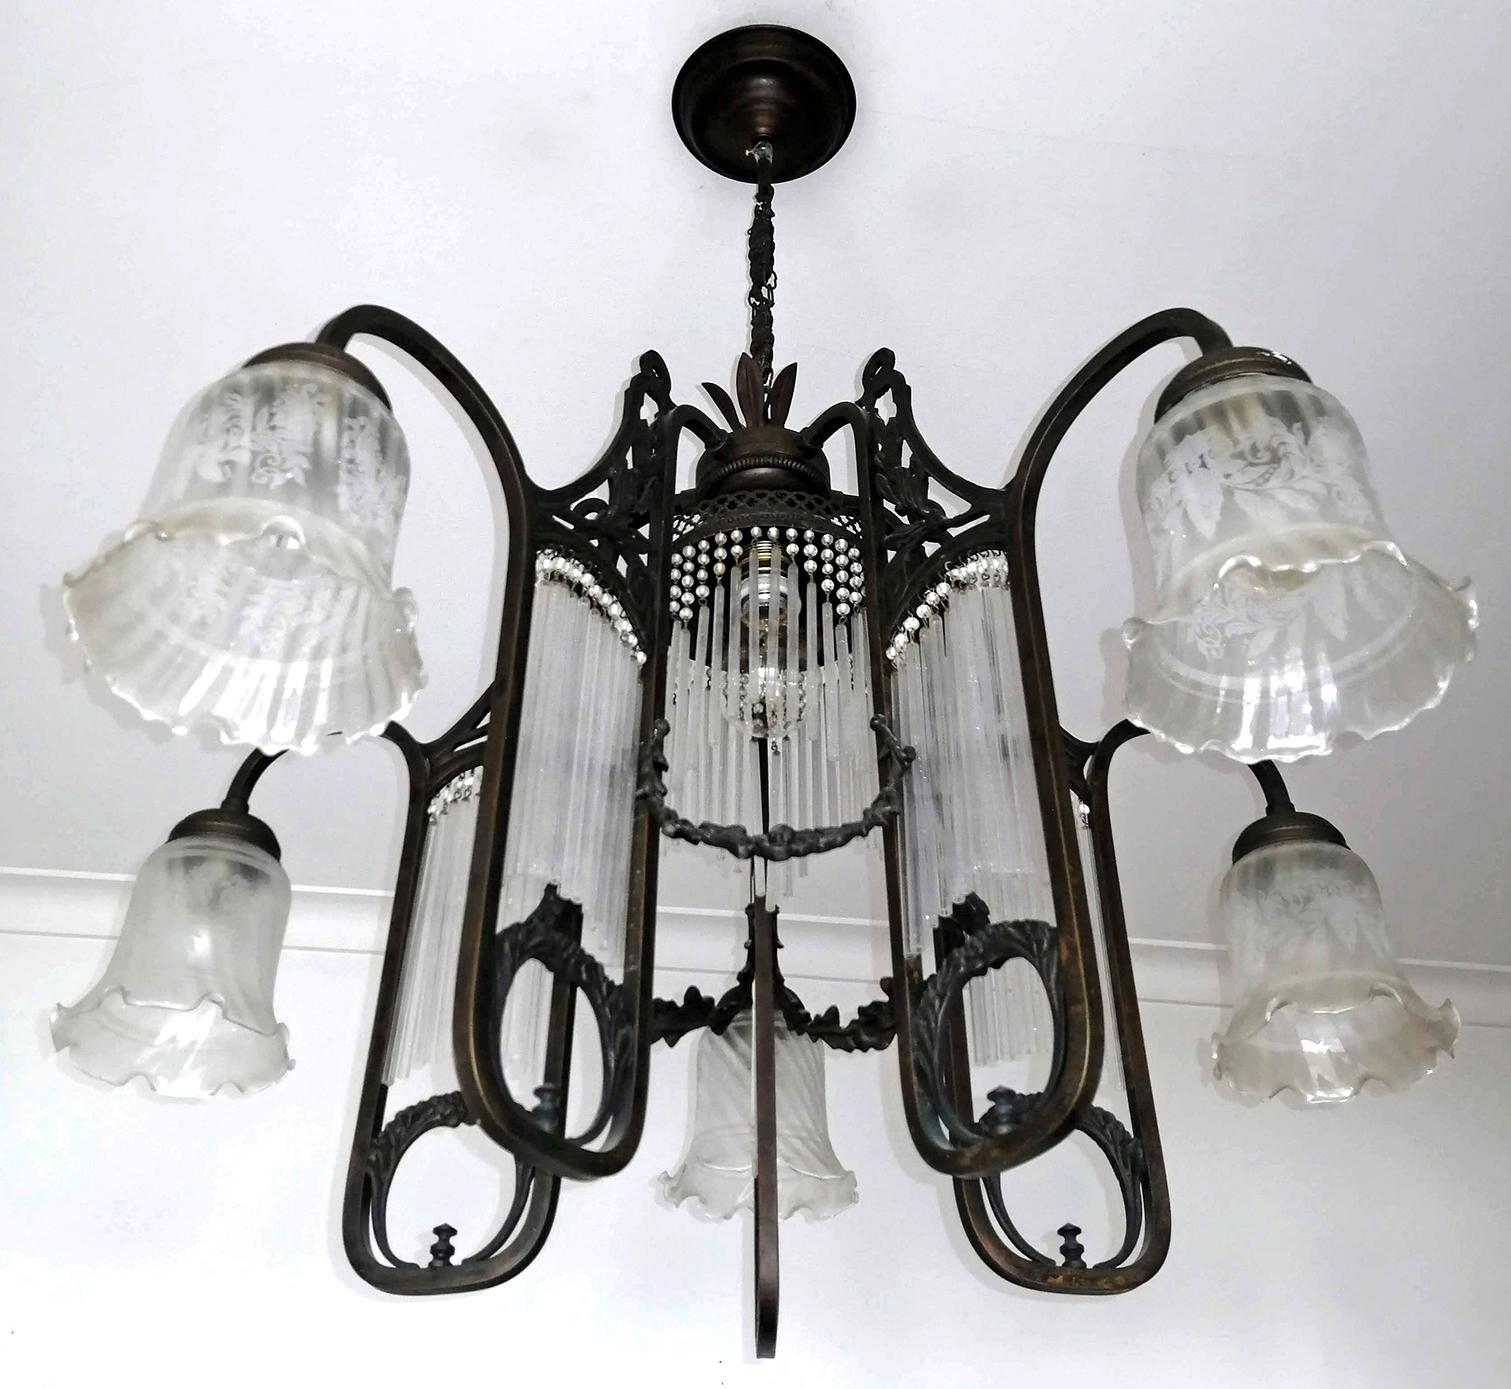 Ornate French Art Nouveau and Art Deco, frosted satin etched art glass lamp shades chandelier
Measures: 
Diameter 30.7 in/ 78 cm
Height 32.2 in / 82 cm
Weight 7 Kg / 15 lb
6-light bulbs (5-E14 + 1 E.27) Good working condition
Assembly required.